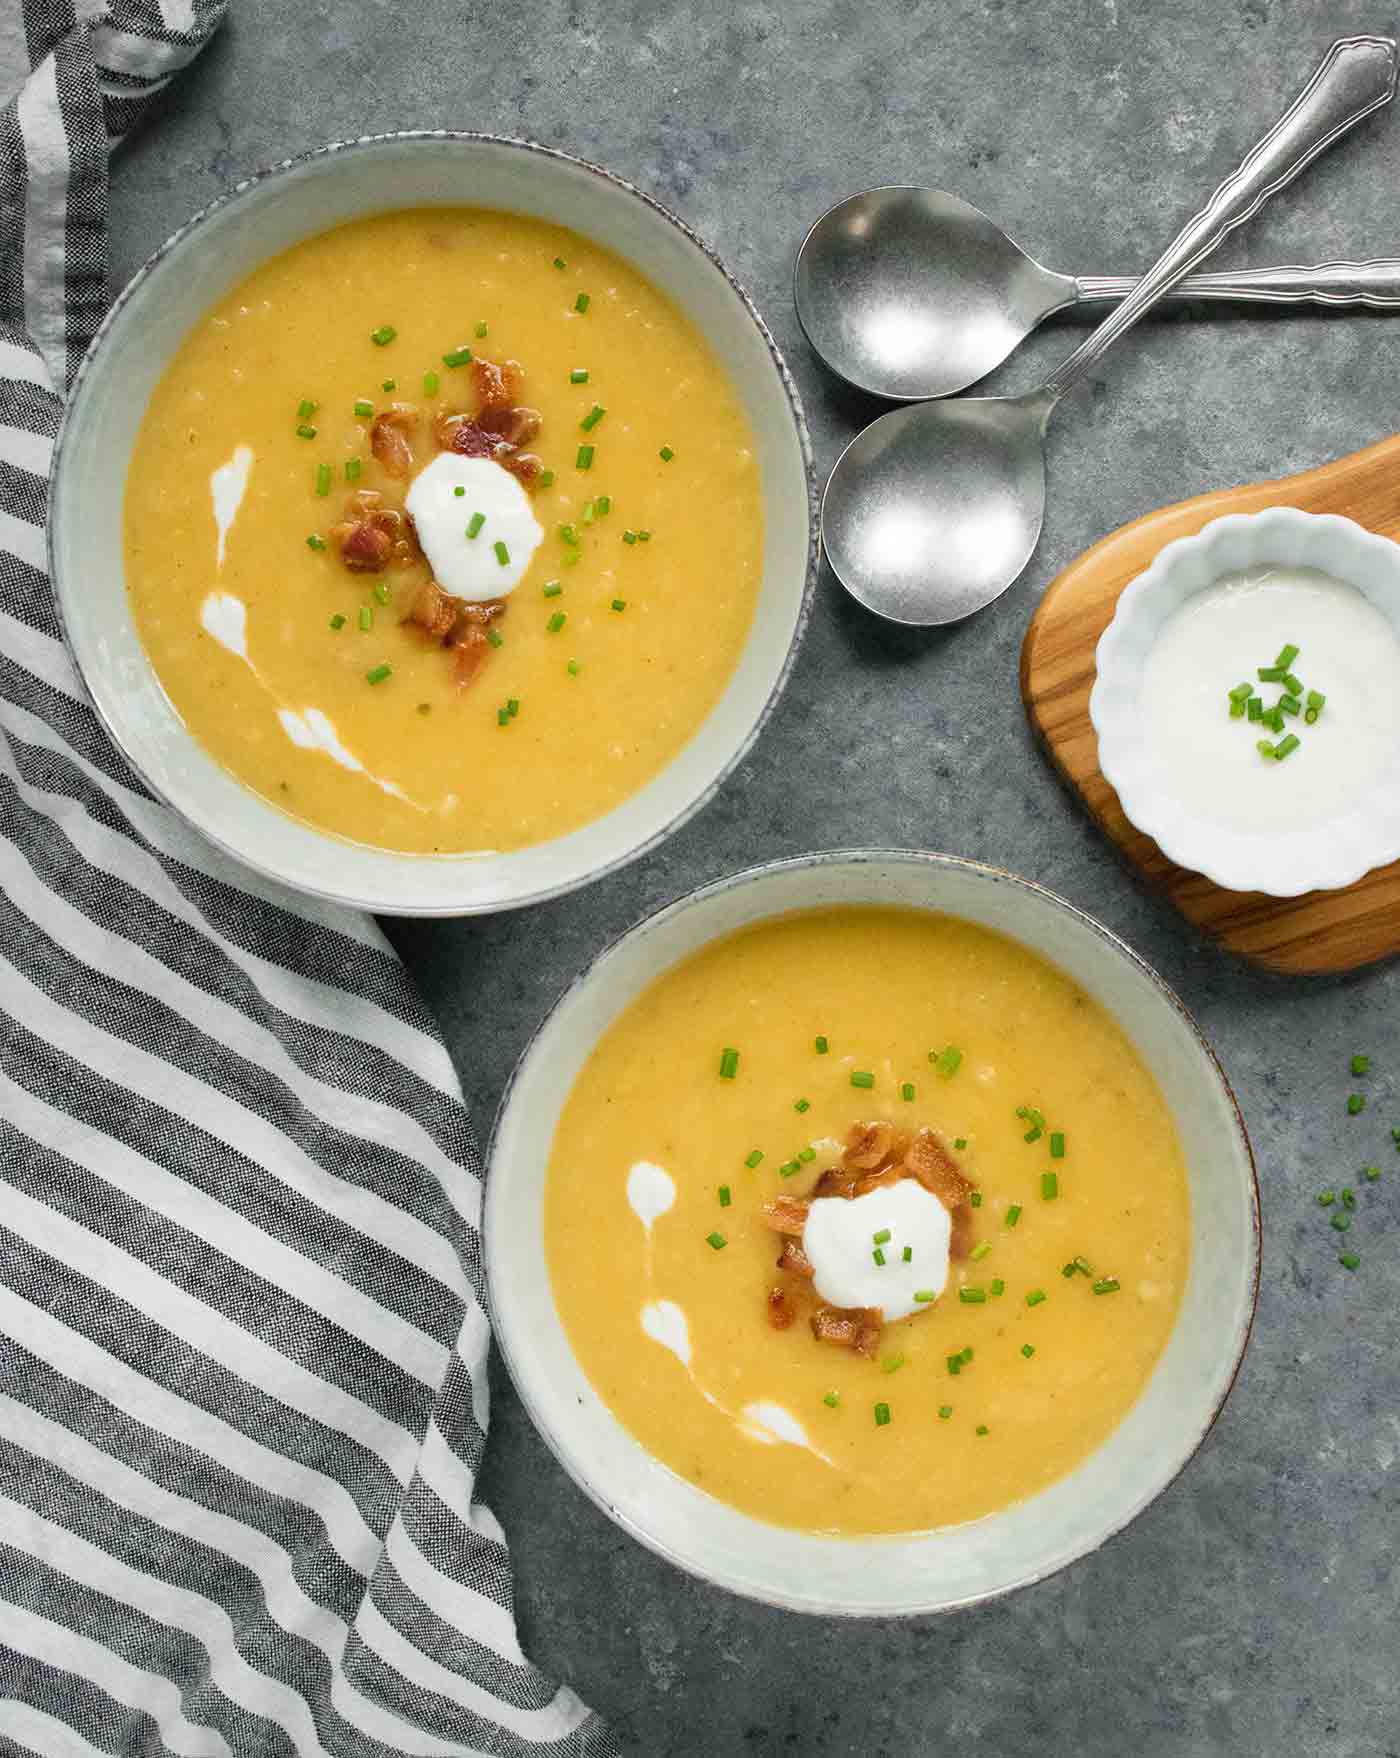 Two bowls of Instant Pot Potato Leek Soup and a bowl of horseradish sour cream on the side